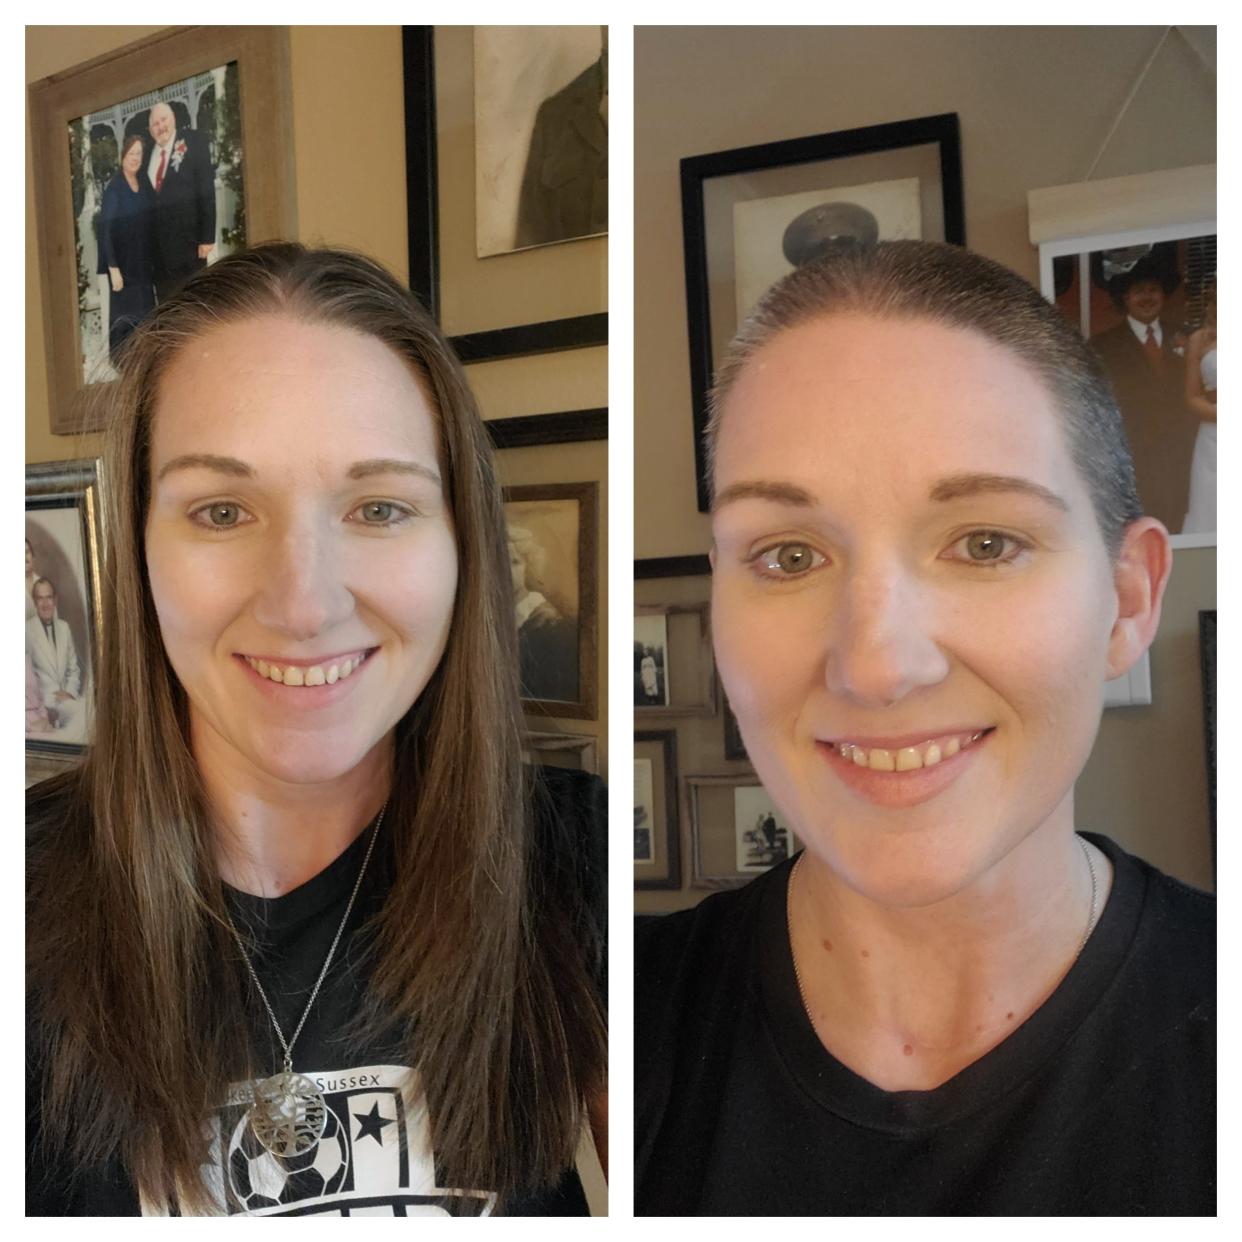 Lannon Village Trustee Amy Martin shaved her head to support her best friend, Sussex Village Trustee Stacy Riedel, who was diagnosed with inflammatory breast cancer in March.